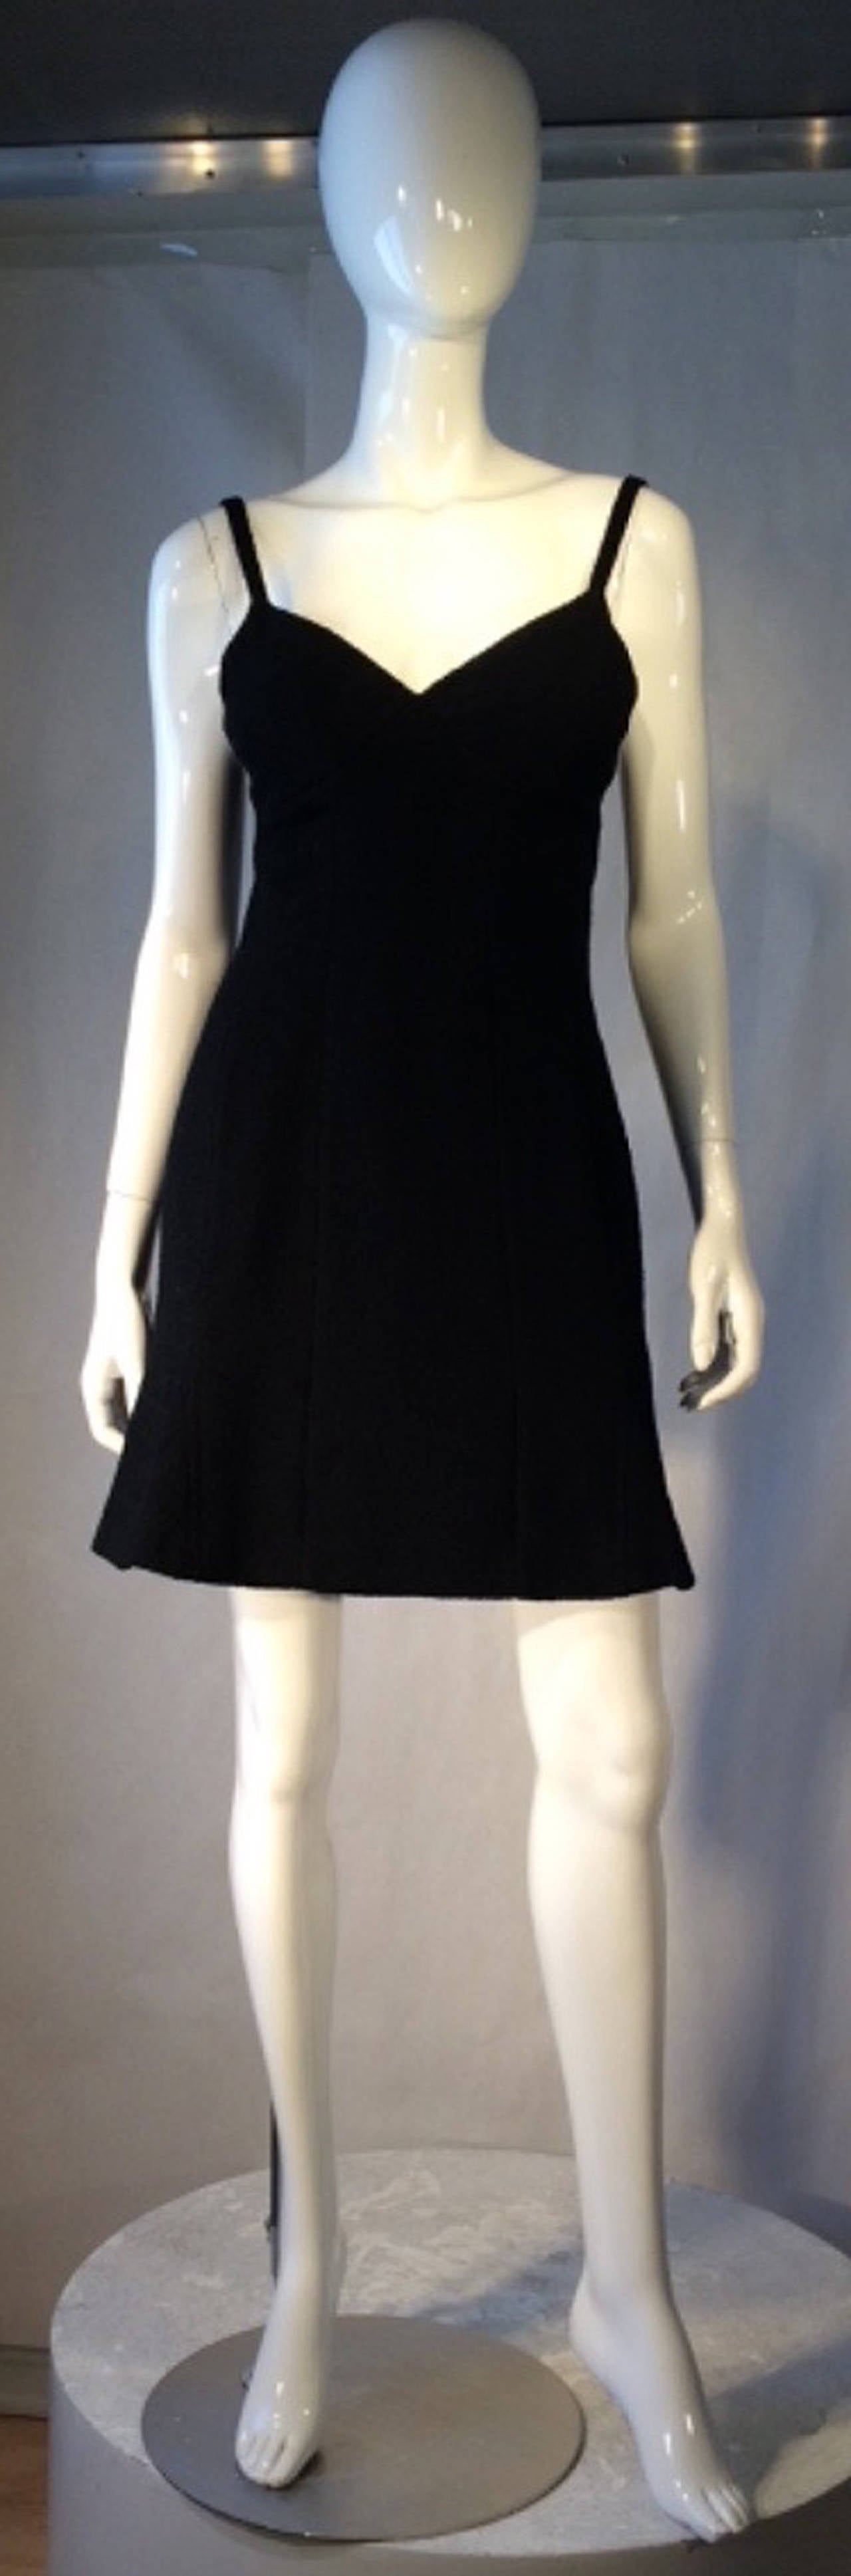 A fine vintage Chanel little black cocktail dress. Authentic wool frisse fabric item features precision seams, flounce hemline and shoulder straps. Item fully silk lined and zips up back. Pristine.